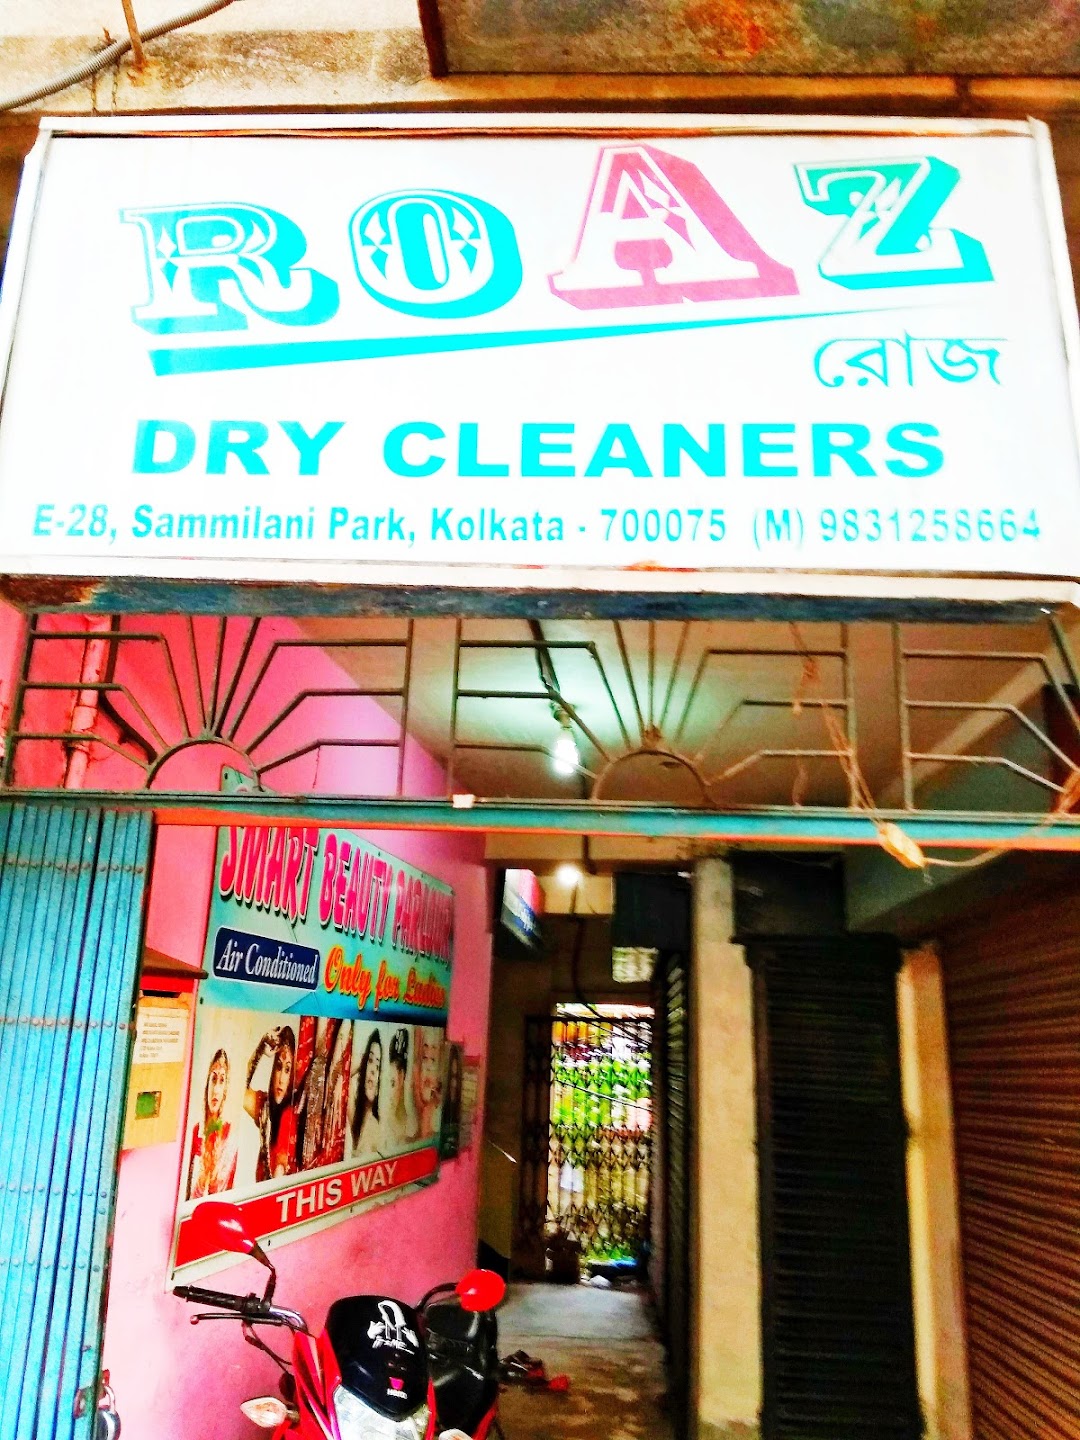 ROAZ-DRY CLEANER